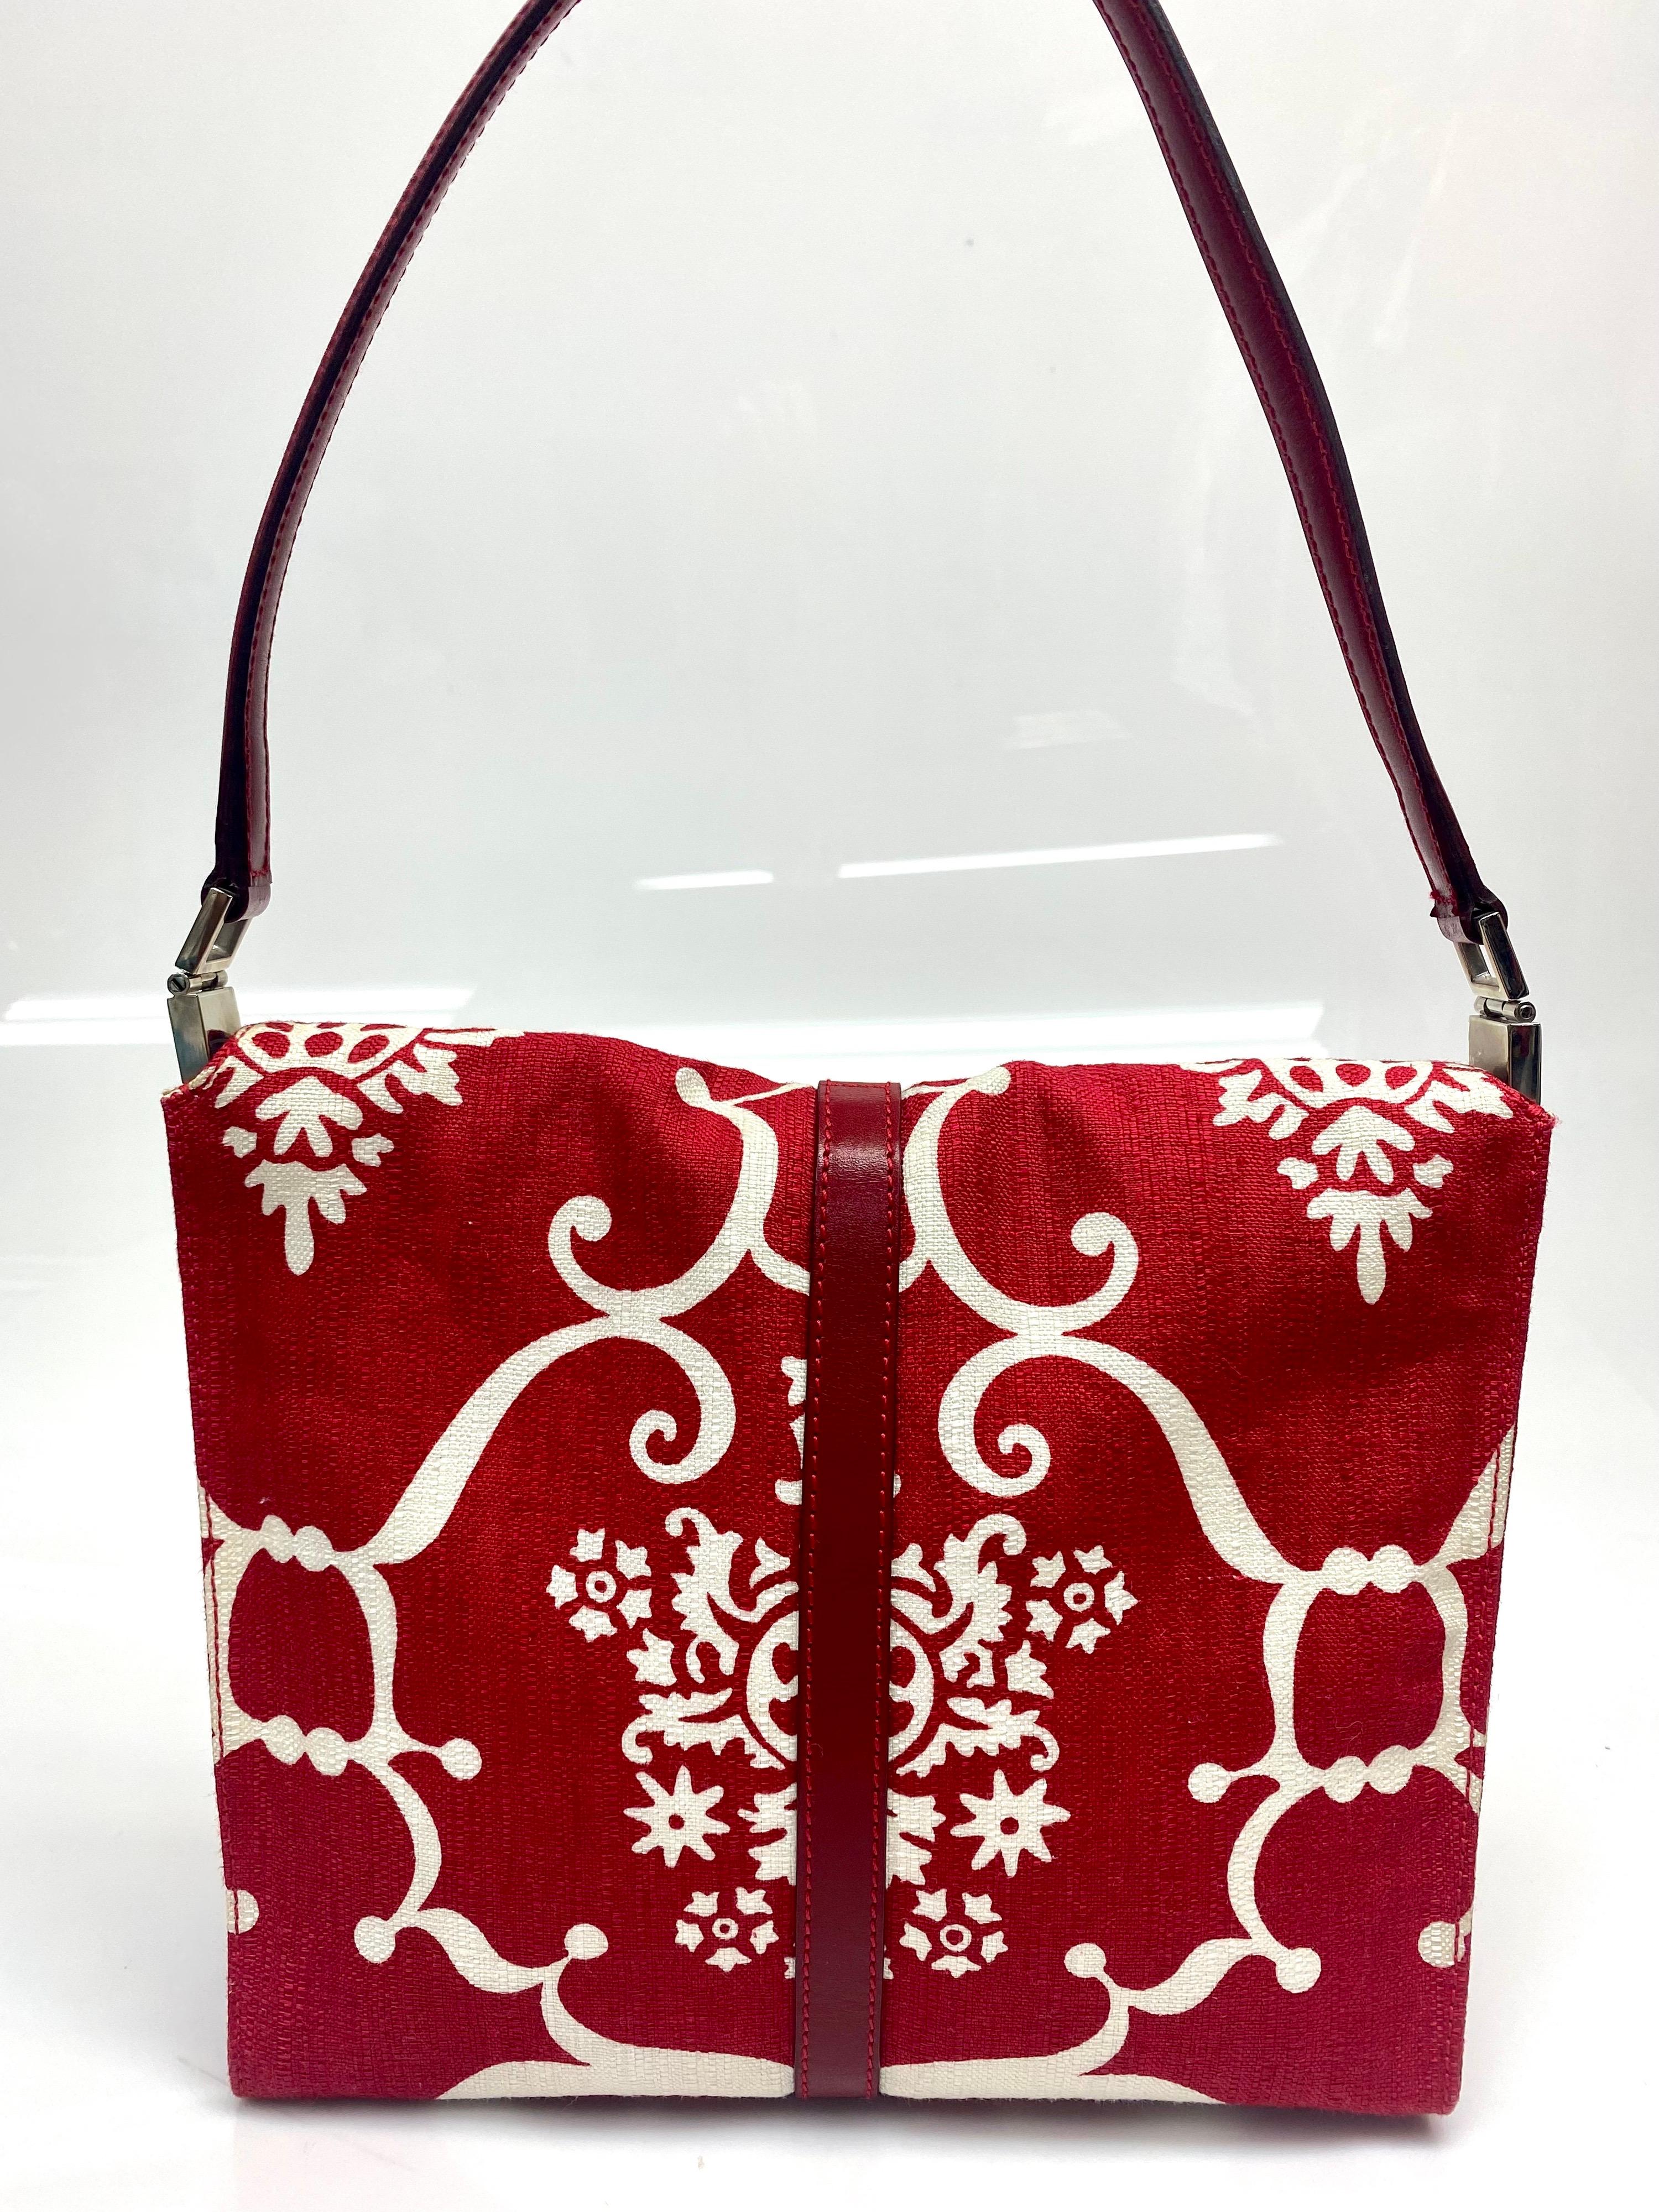 Gucci Fabric Printed Leather Red and White Bag 2